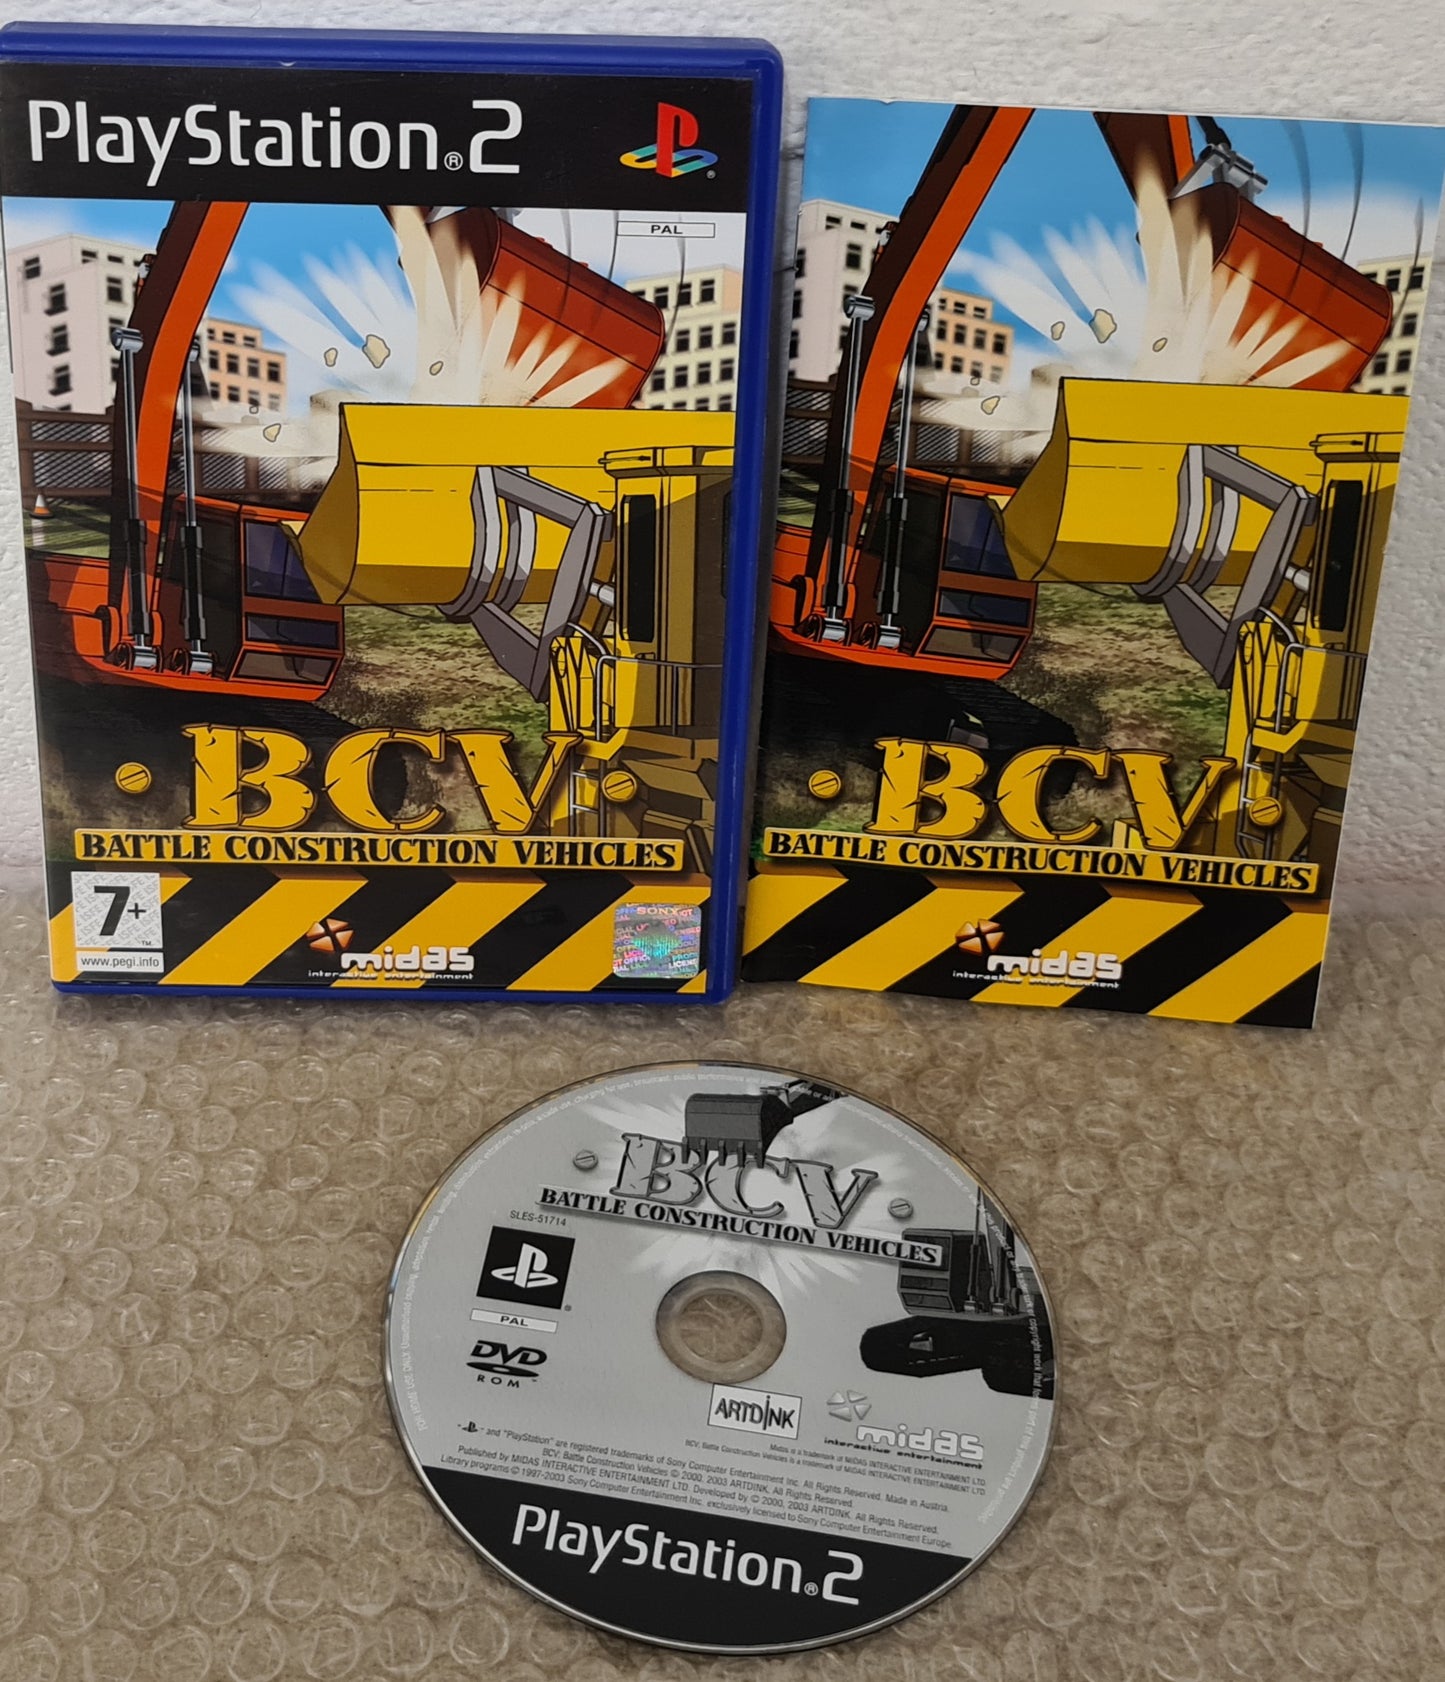 BCV Battle Construction Vehicles Sony Playstation 2 (PS2) Game